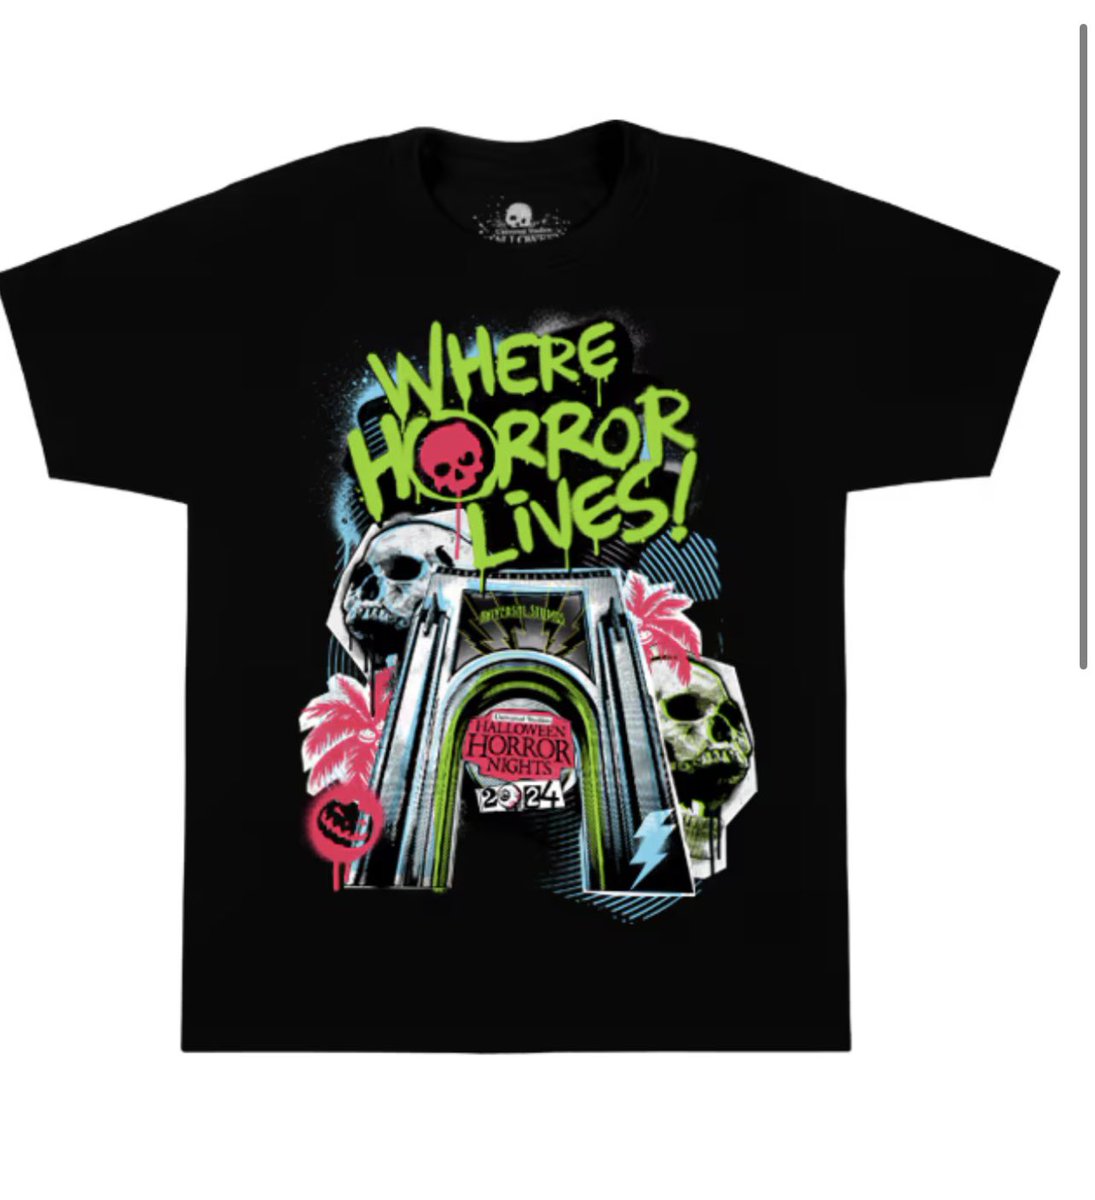 NEW HHN “Where Horror Lives!” Shirt Comes In Black Now. ONLINE ONLY